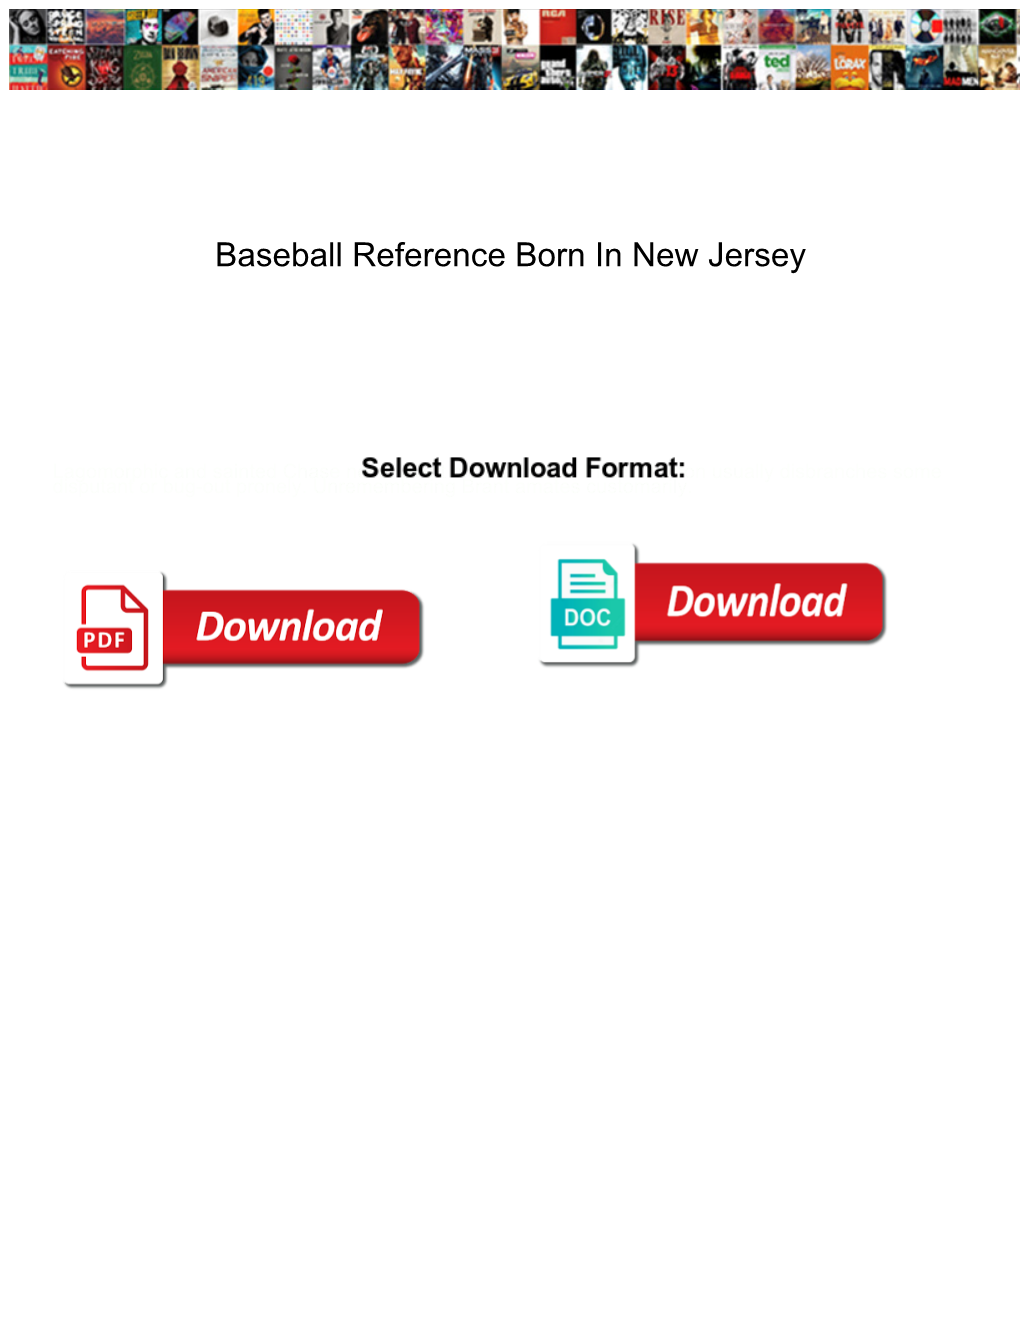 Baseball Reference Born in New Jersey